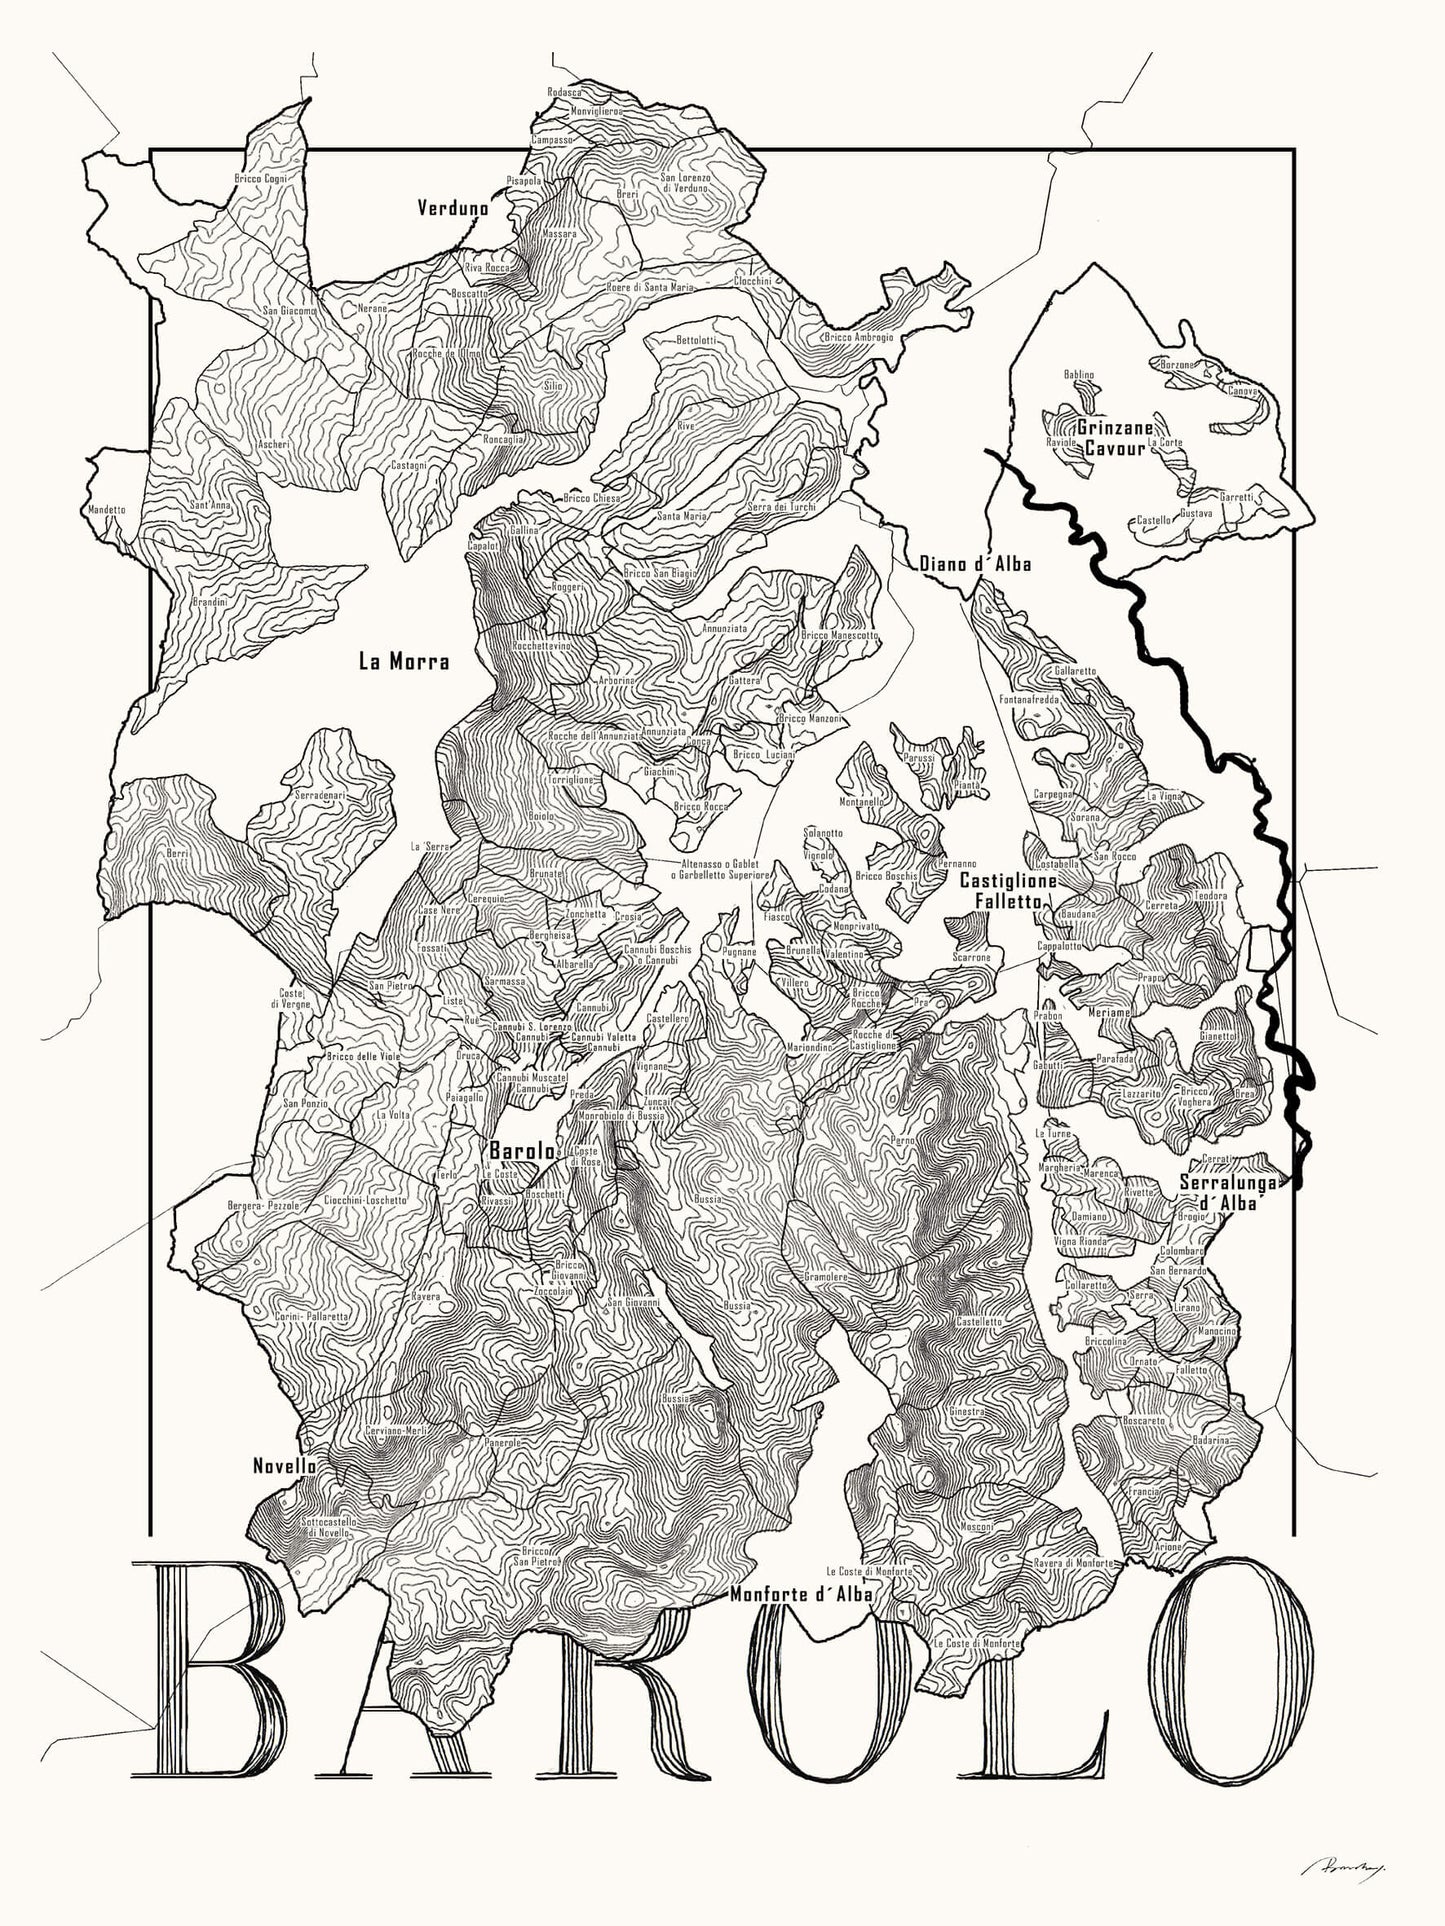 Barolo Wine map poster.Wine art. Wine print. Wine poster.Exclusive wine map posters. Premium quality wine maps printed on environmentally friendly FSC marked paper. 